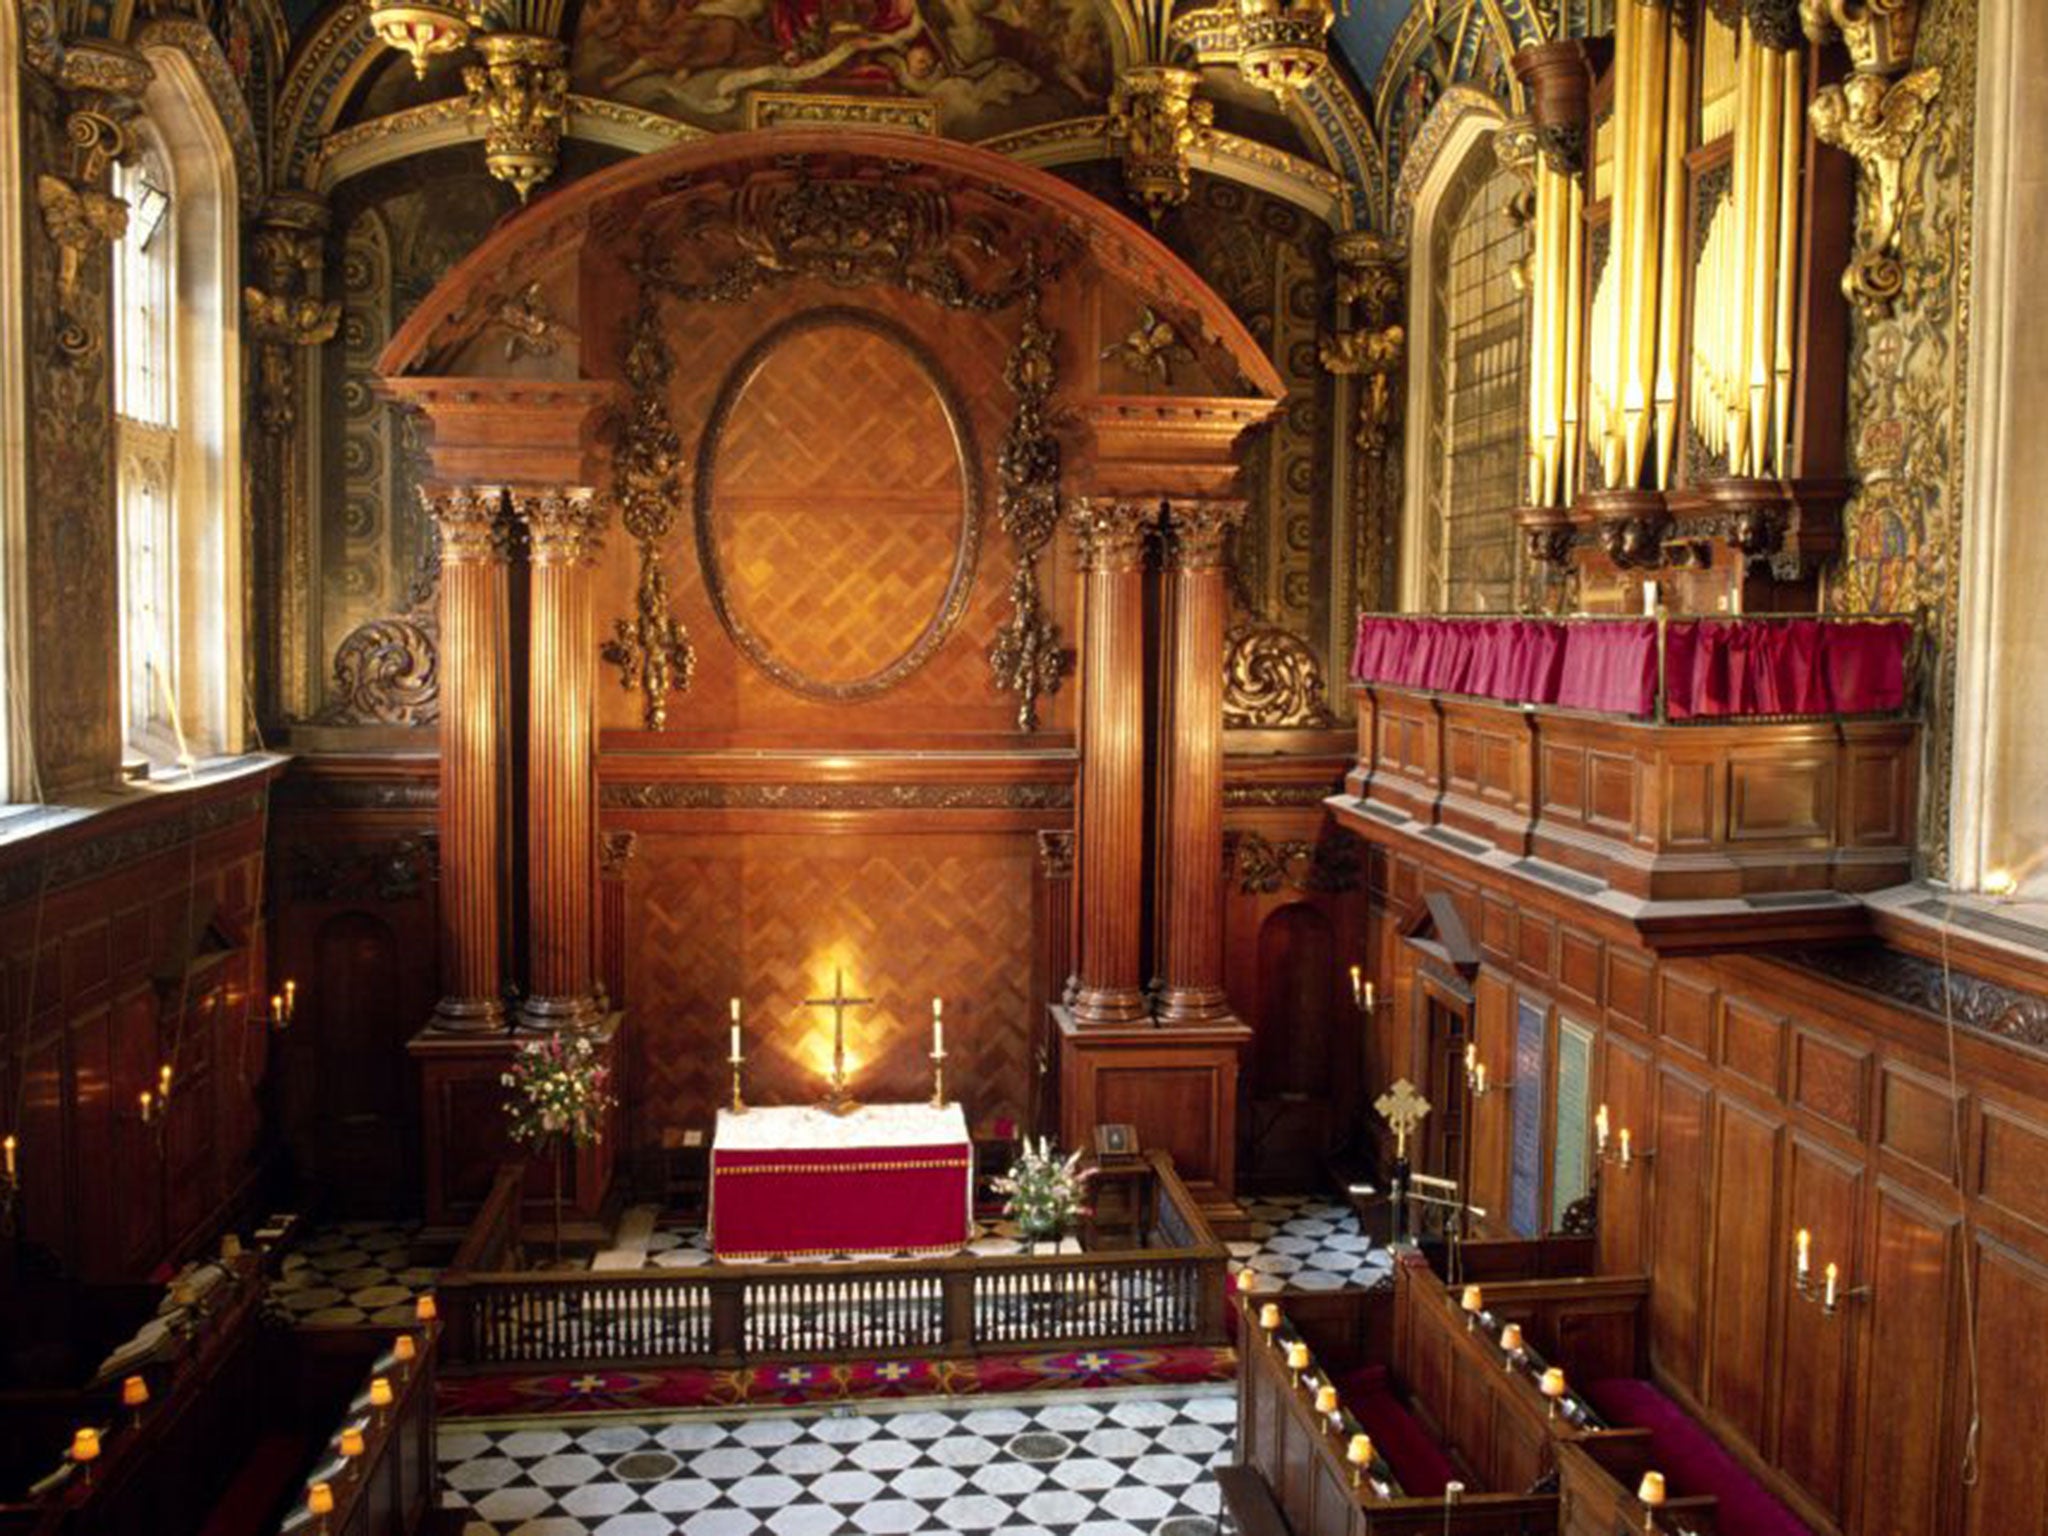 The Chapel Royal at Hampton Court has been in continuous use for over 450 years